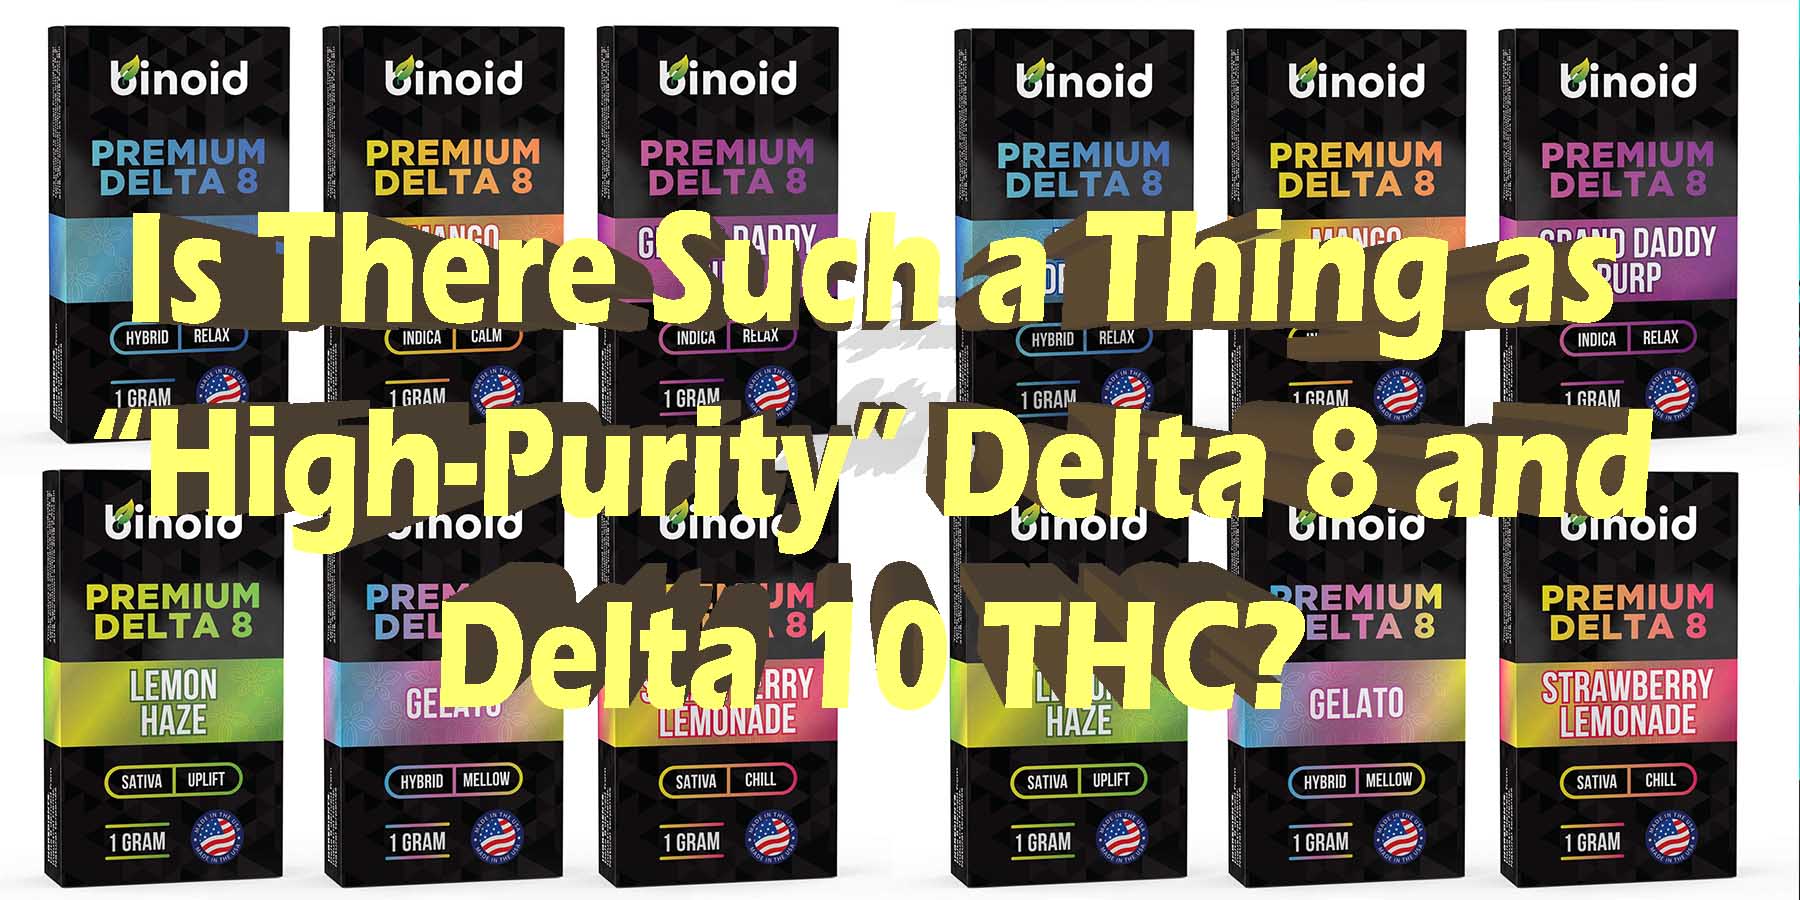 Is There Such a Thing as High Purity Delta 8 THC and Delta 10 THC LowestPrice Coupon Discount For Smoking Best High Smoke Shop Online Near Me StrongestBrand Binoid